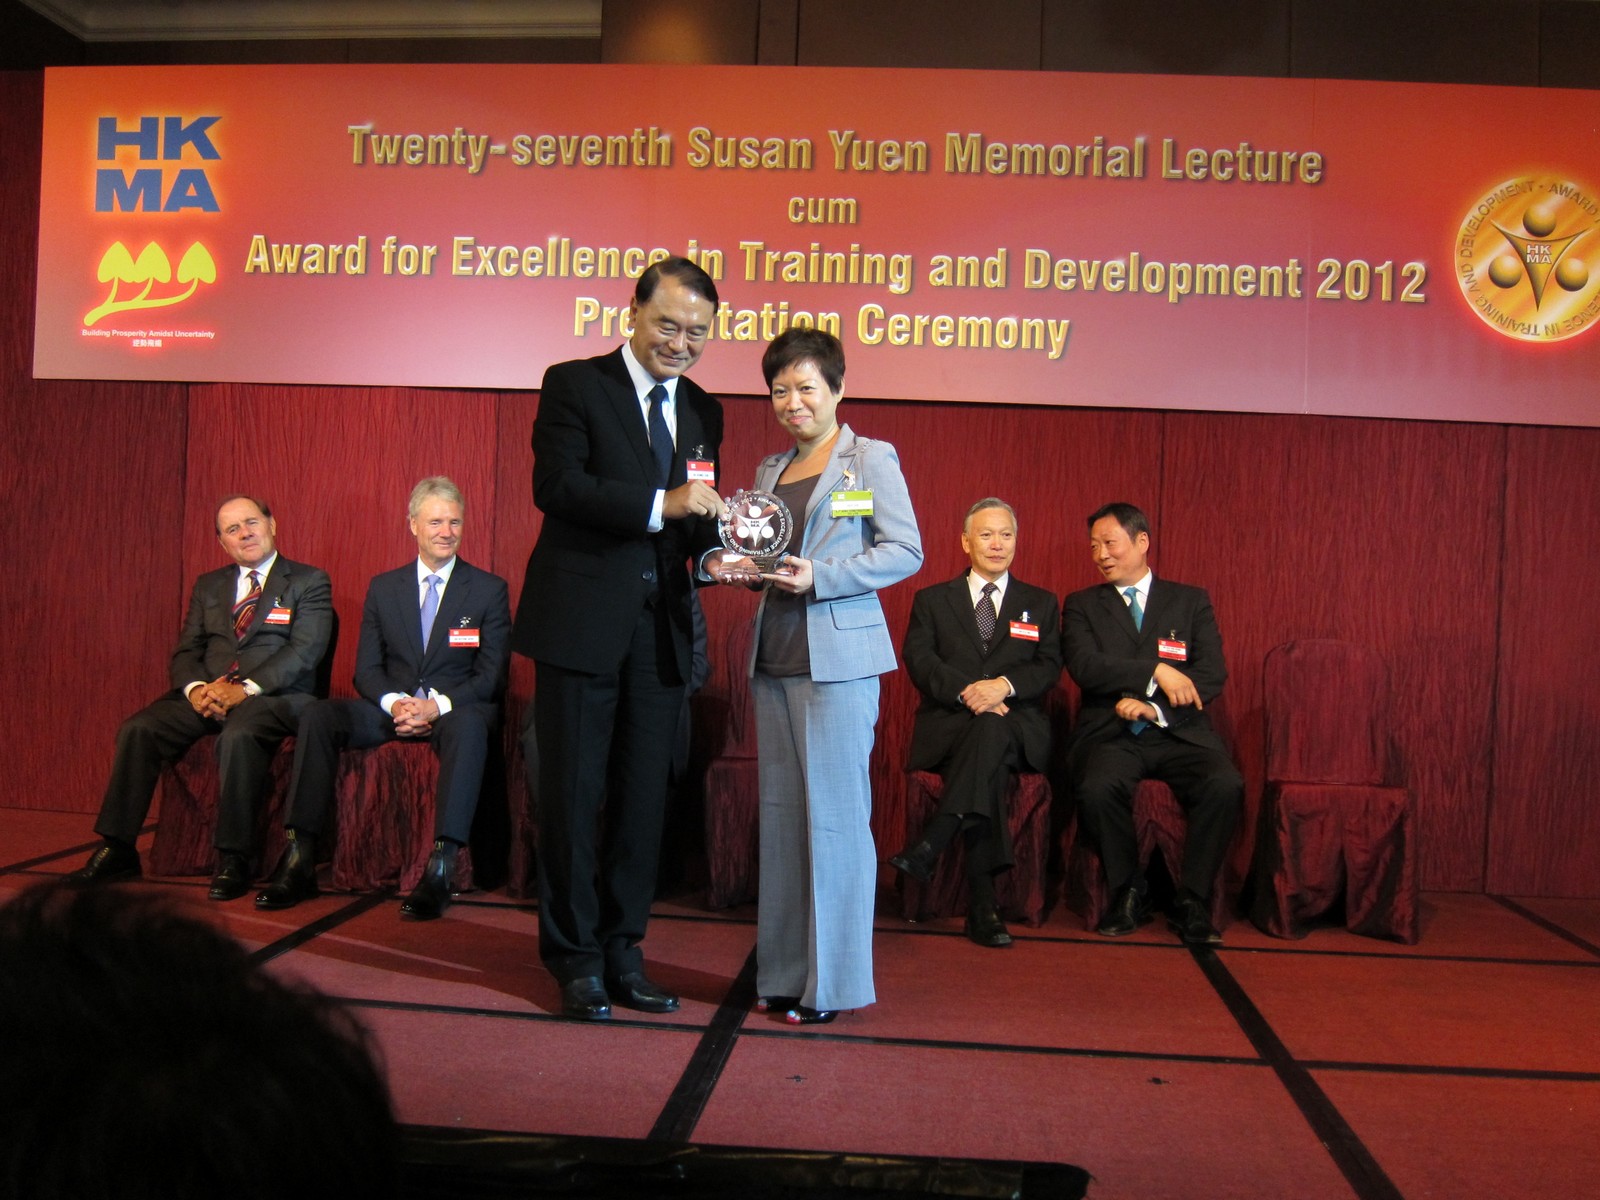 Dr Dennis Sun, BBS, JP, HKMA Chairman, presents the Silver Award in the Development Category of the HKMA's Awards for Excellence in Training and Development 2012 to Ms. Ada Lee, Manager (Training & Development) of Hip Hing Construction